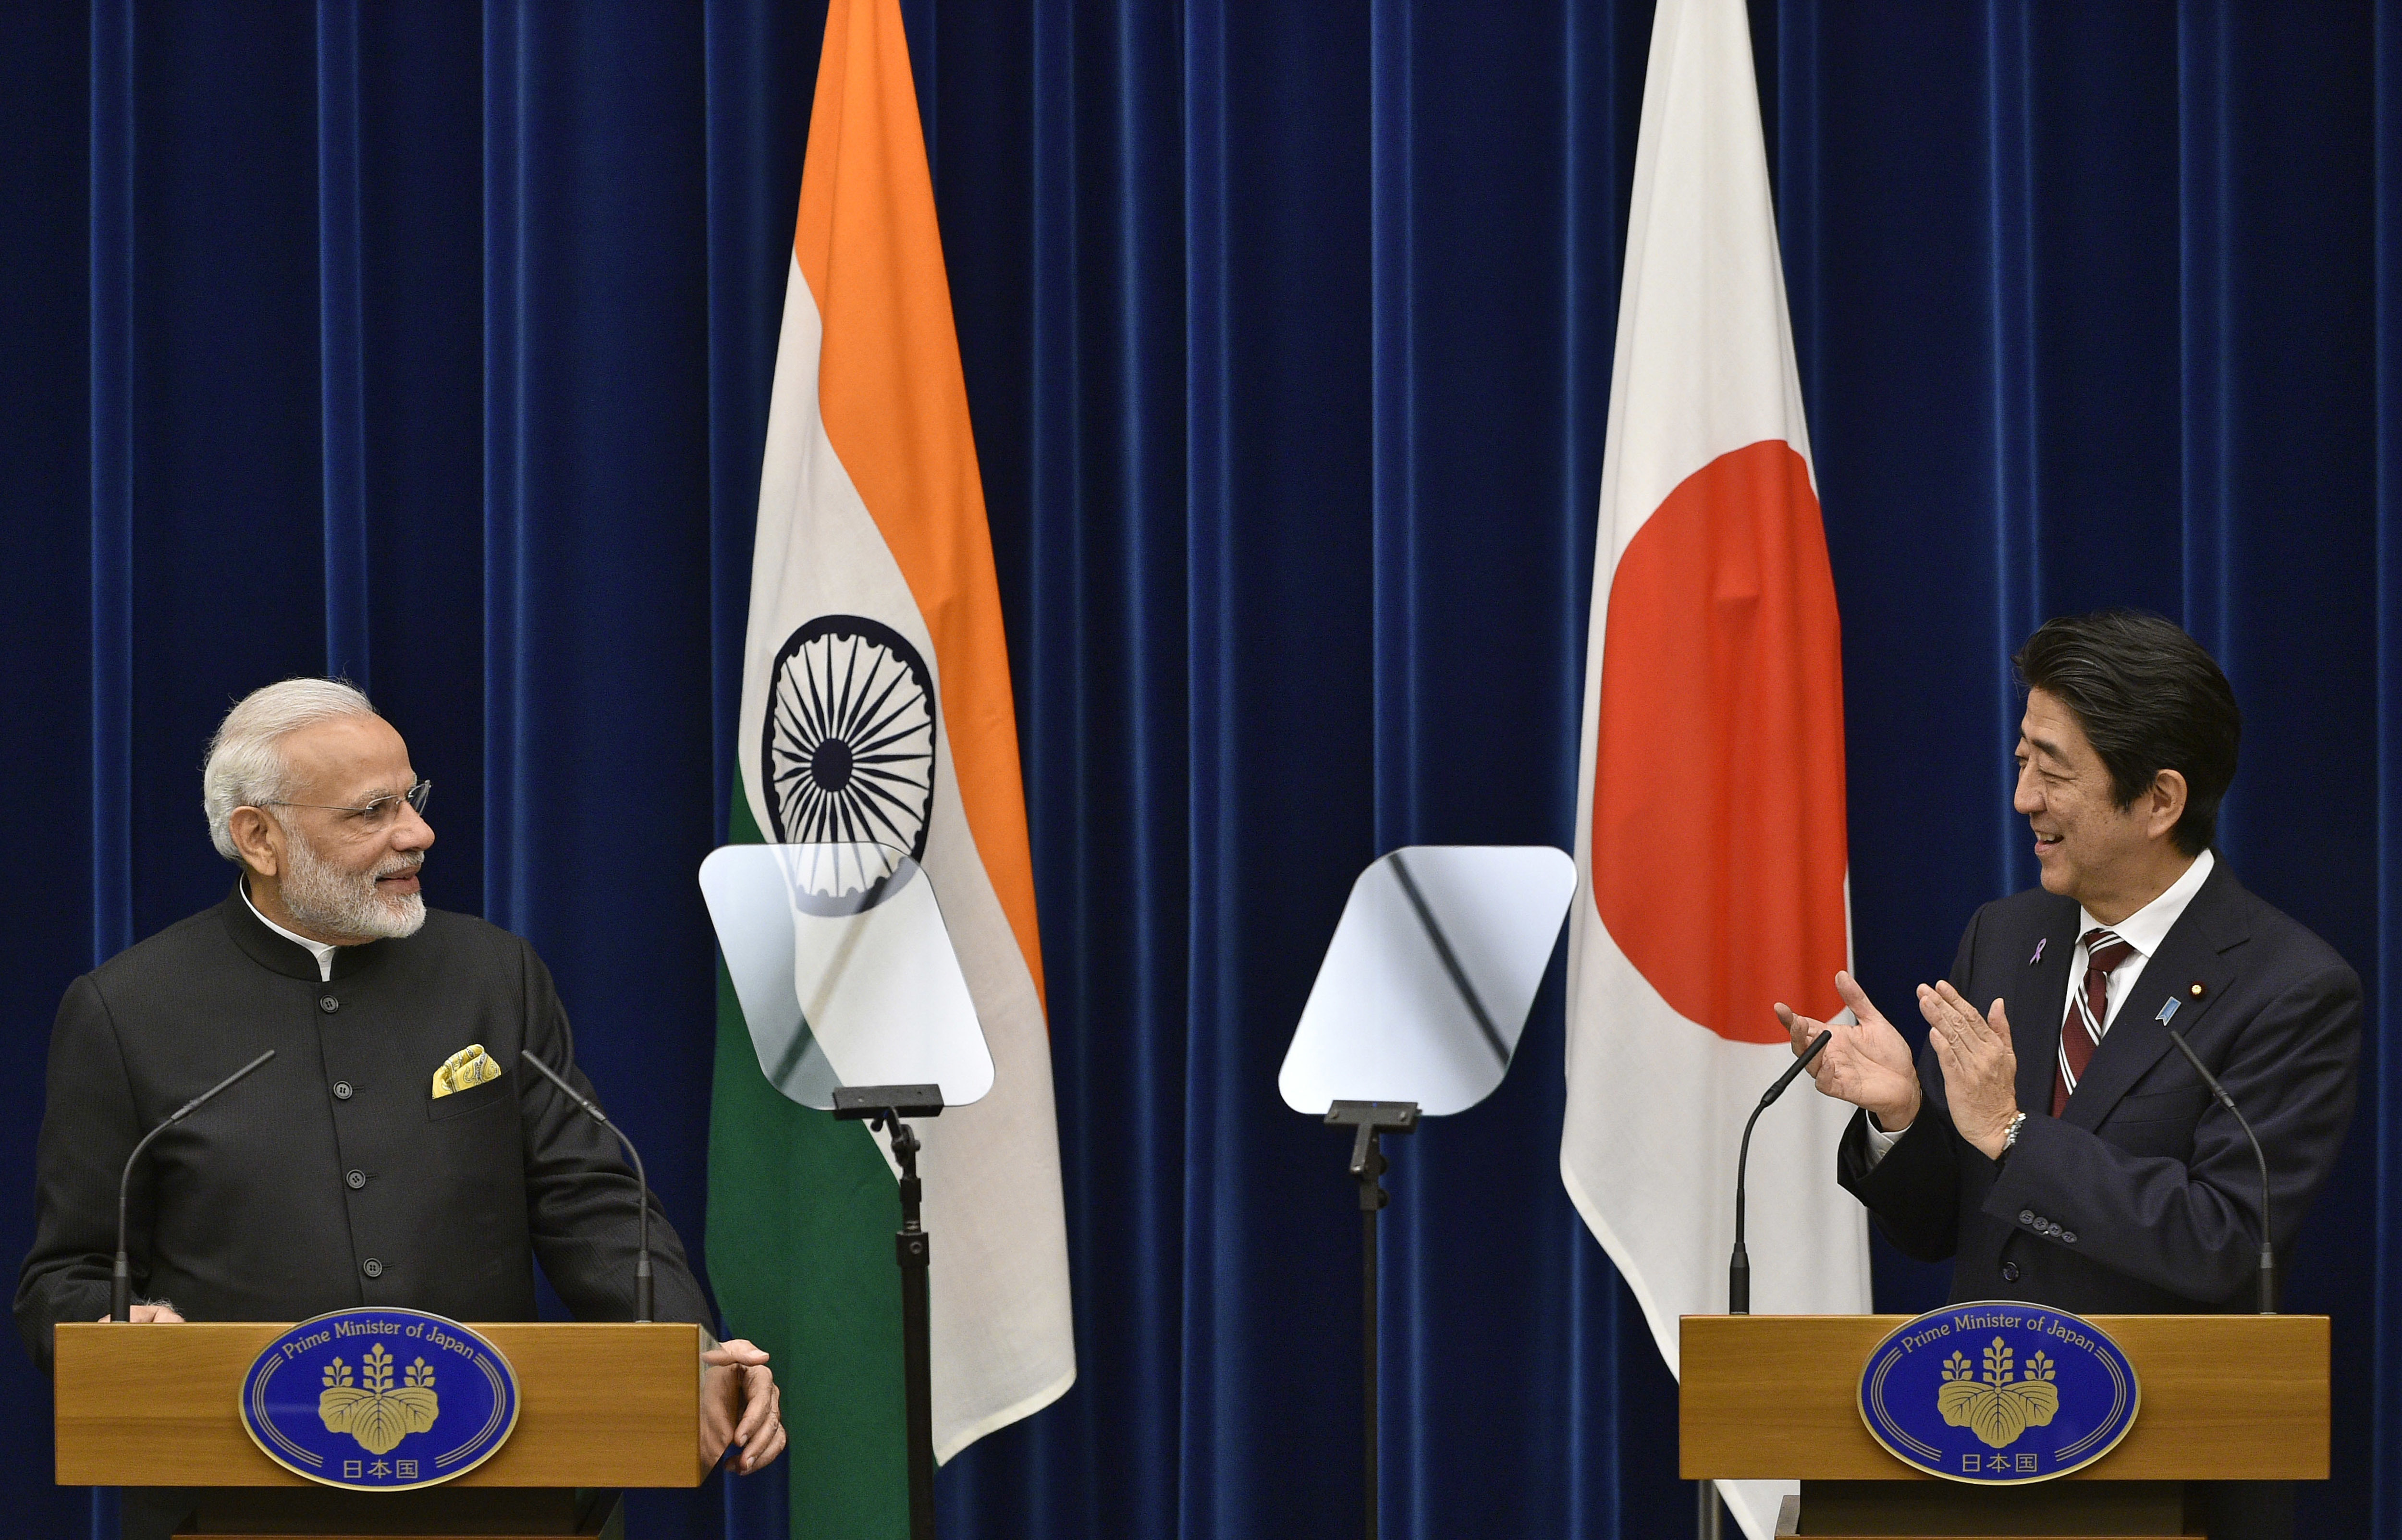 India's Prime Minister Narendra Modi (L) and Japan's Prime Minister Shinzo Abe attend a joint press conference at Abe's official residence in Tokyo on November 11, 2016.